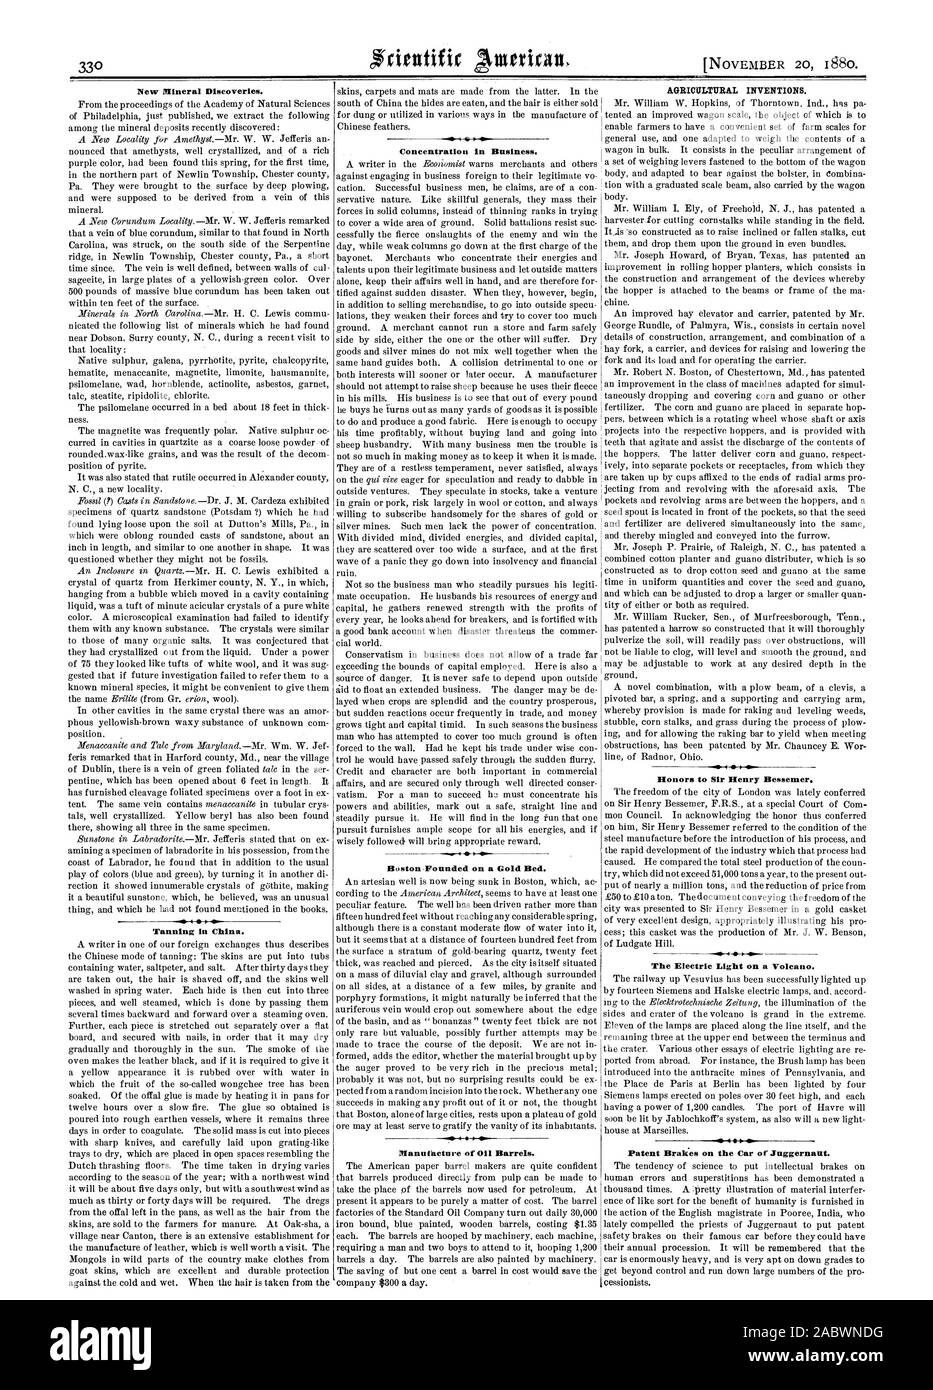 New Mineral Discoveries. Tanning in China. Concentration in Business. Boston Founded on a Gold Bed. Manutketnre of 0 Barrels. AGRICULTURAL INVENTIONS. Honors to Sir Henry Bessemer. The Electric Light on a volcano. Patent Brakes on the Car of Juggernaut., scientific american, 1880-11-11 Stock Photo